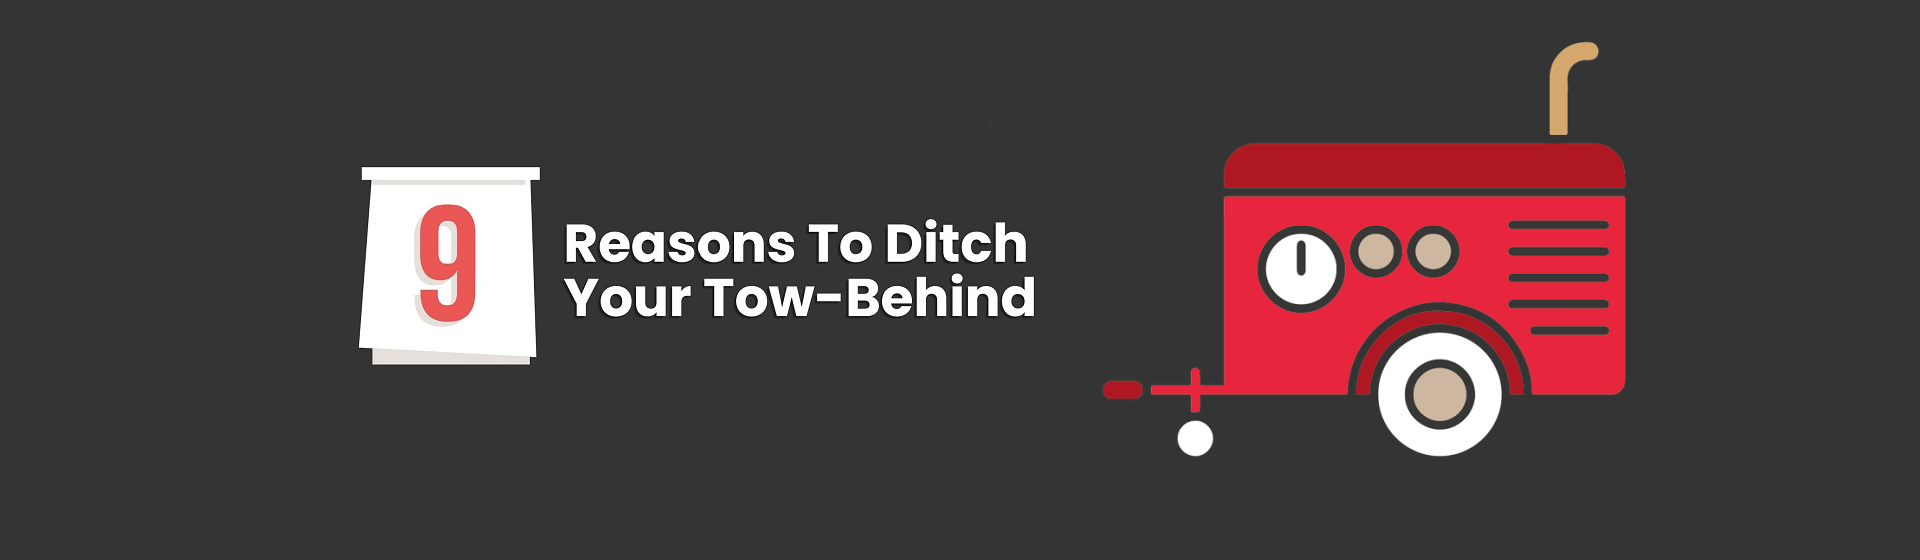 ditch-tow-behind-banner-a